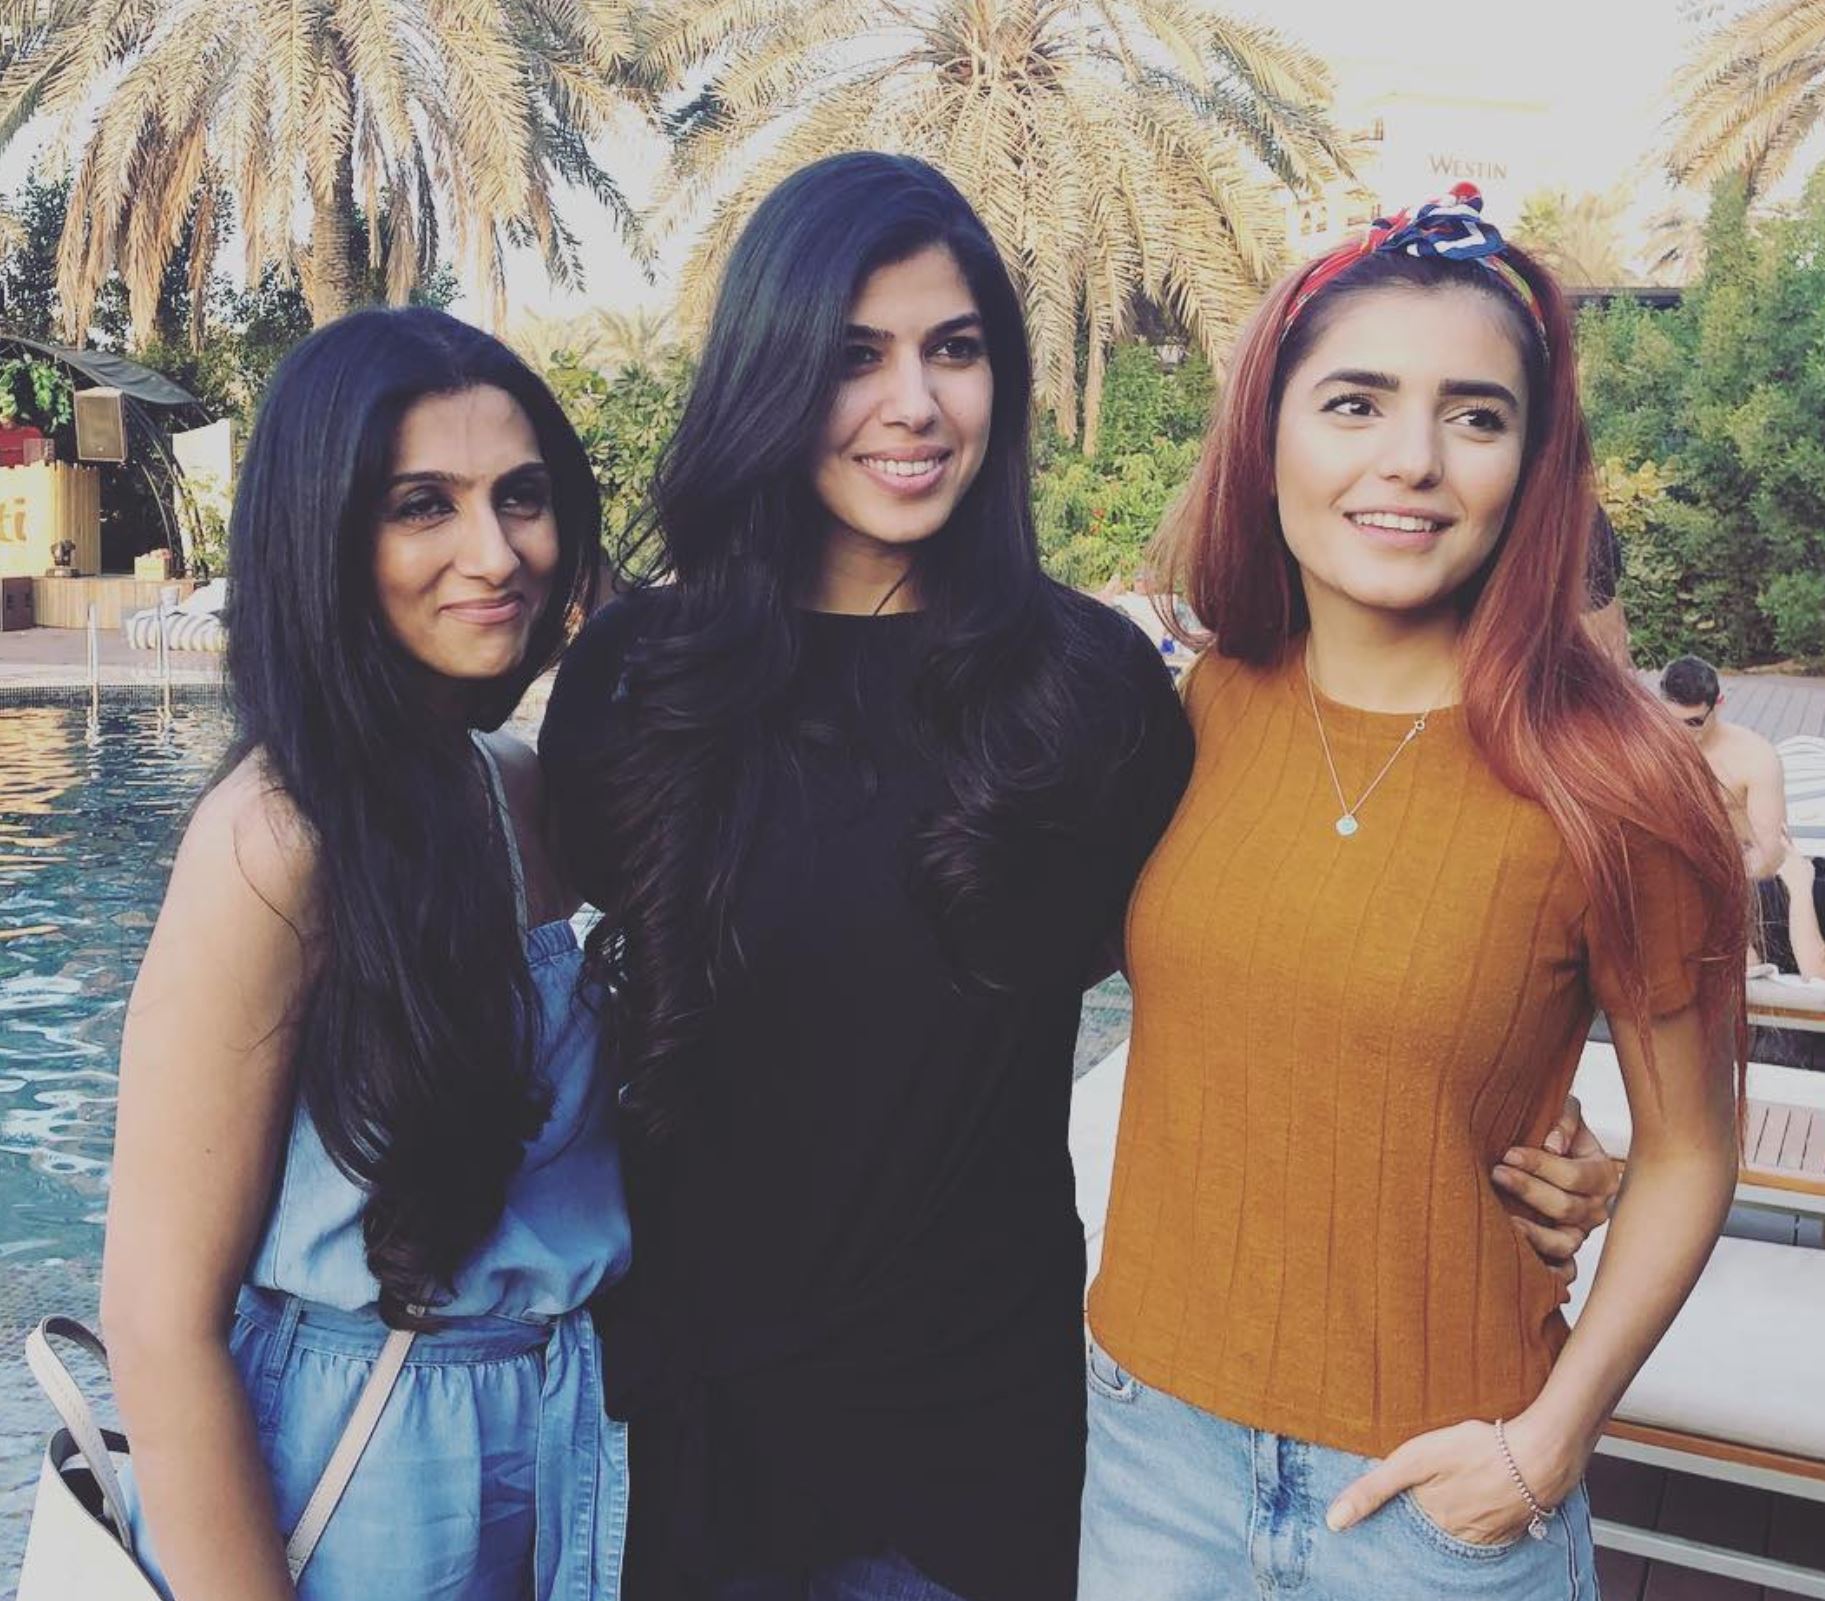 Momina Mustehsan Celebrates Diwali With Her Friends